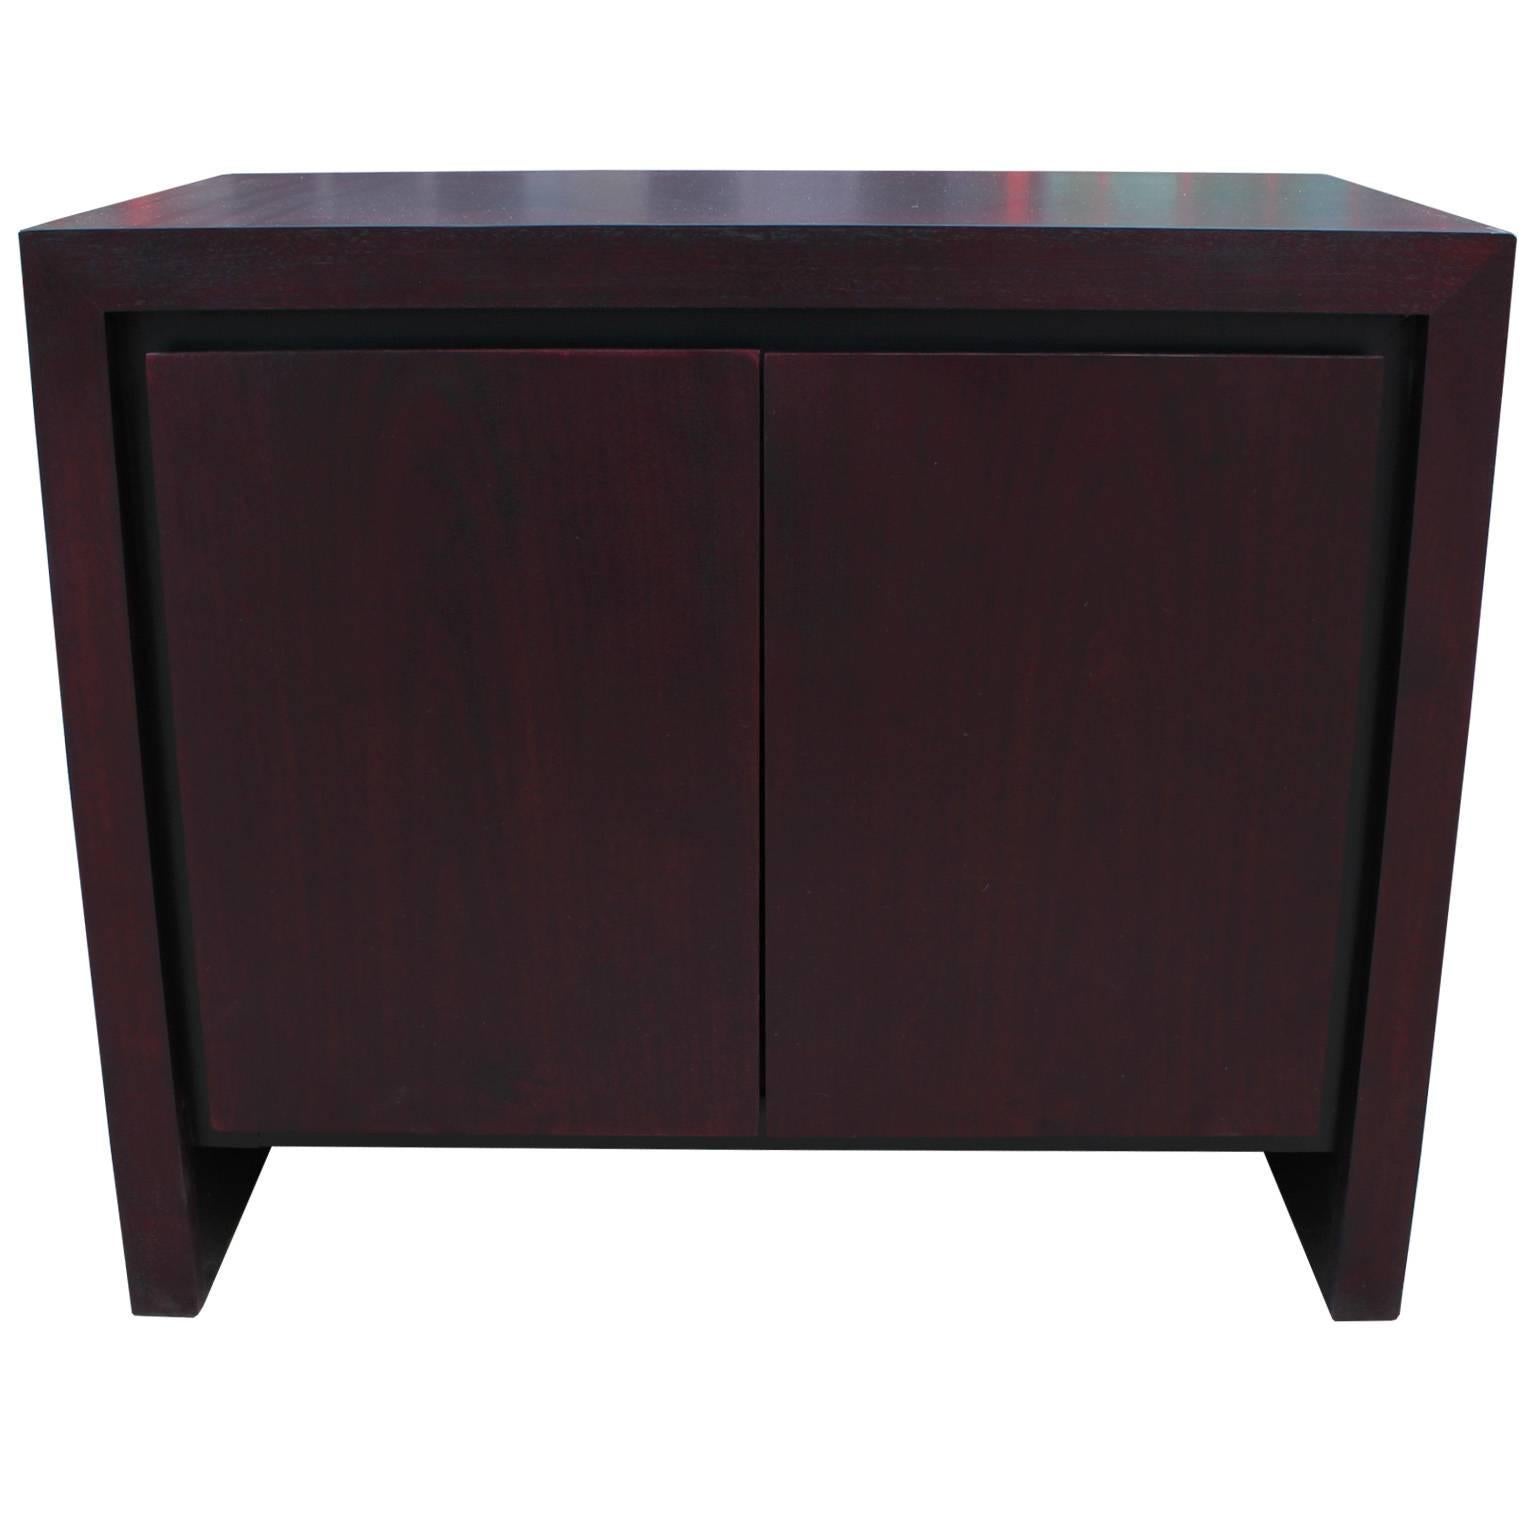 Wonderful pair of nightstands by Dillingham. Nightstands are finished in a bold purple stain. Doors open to reveal a single shelf. The more light in the room the more bold the finish becomes.